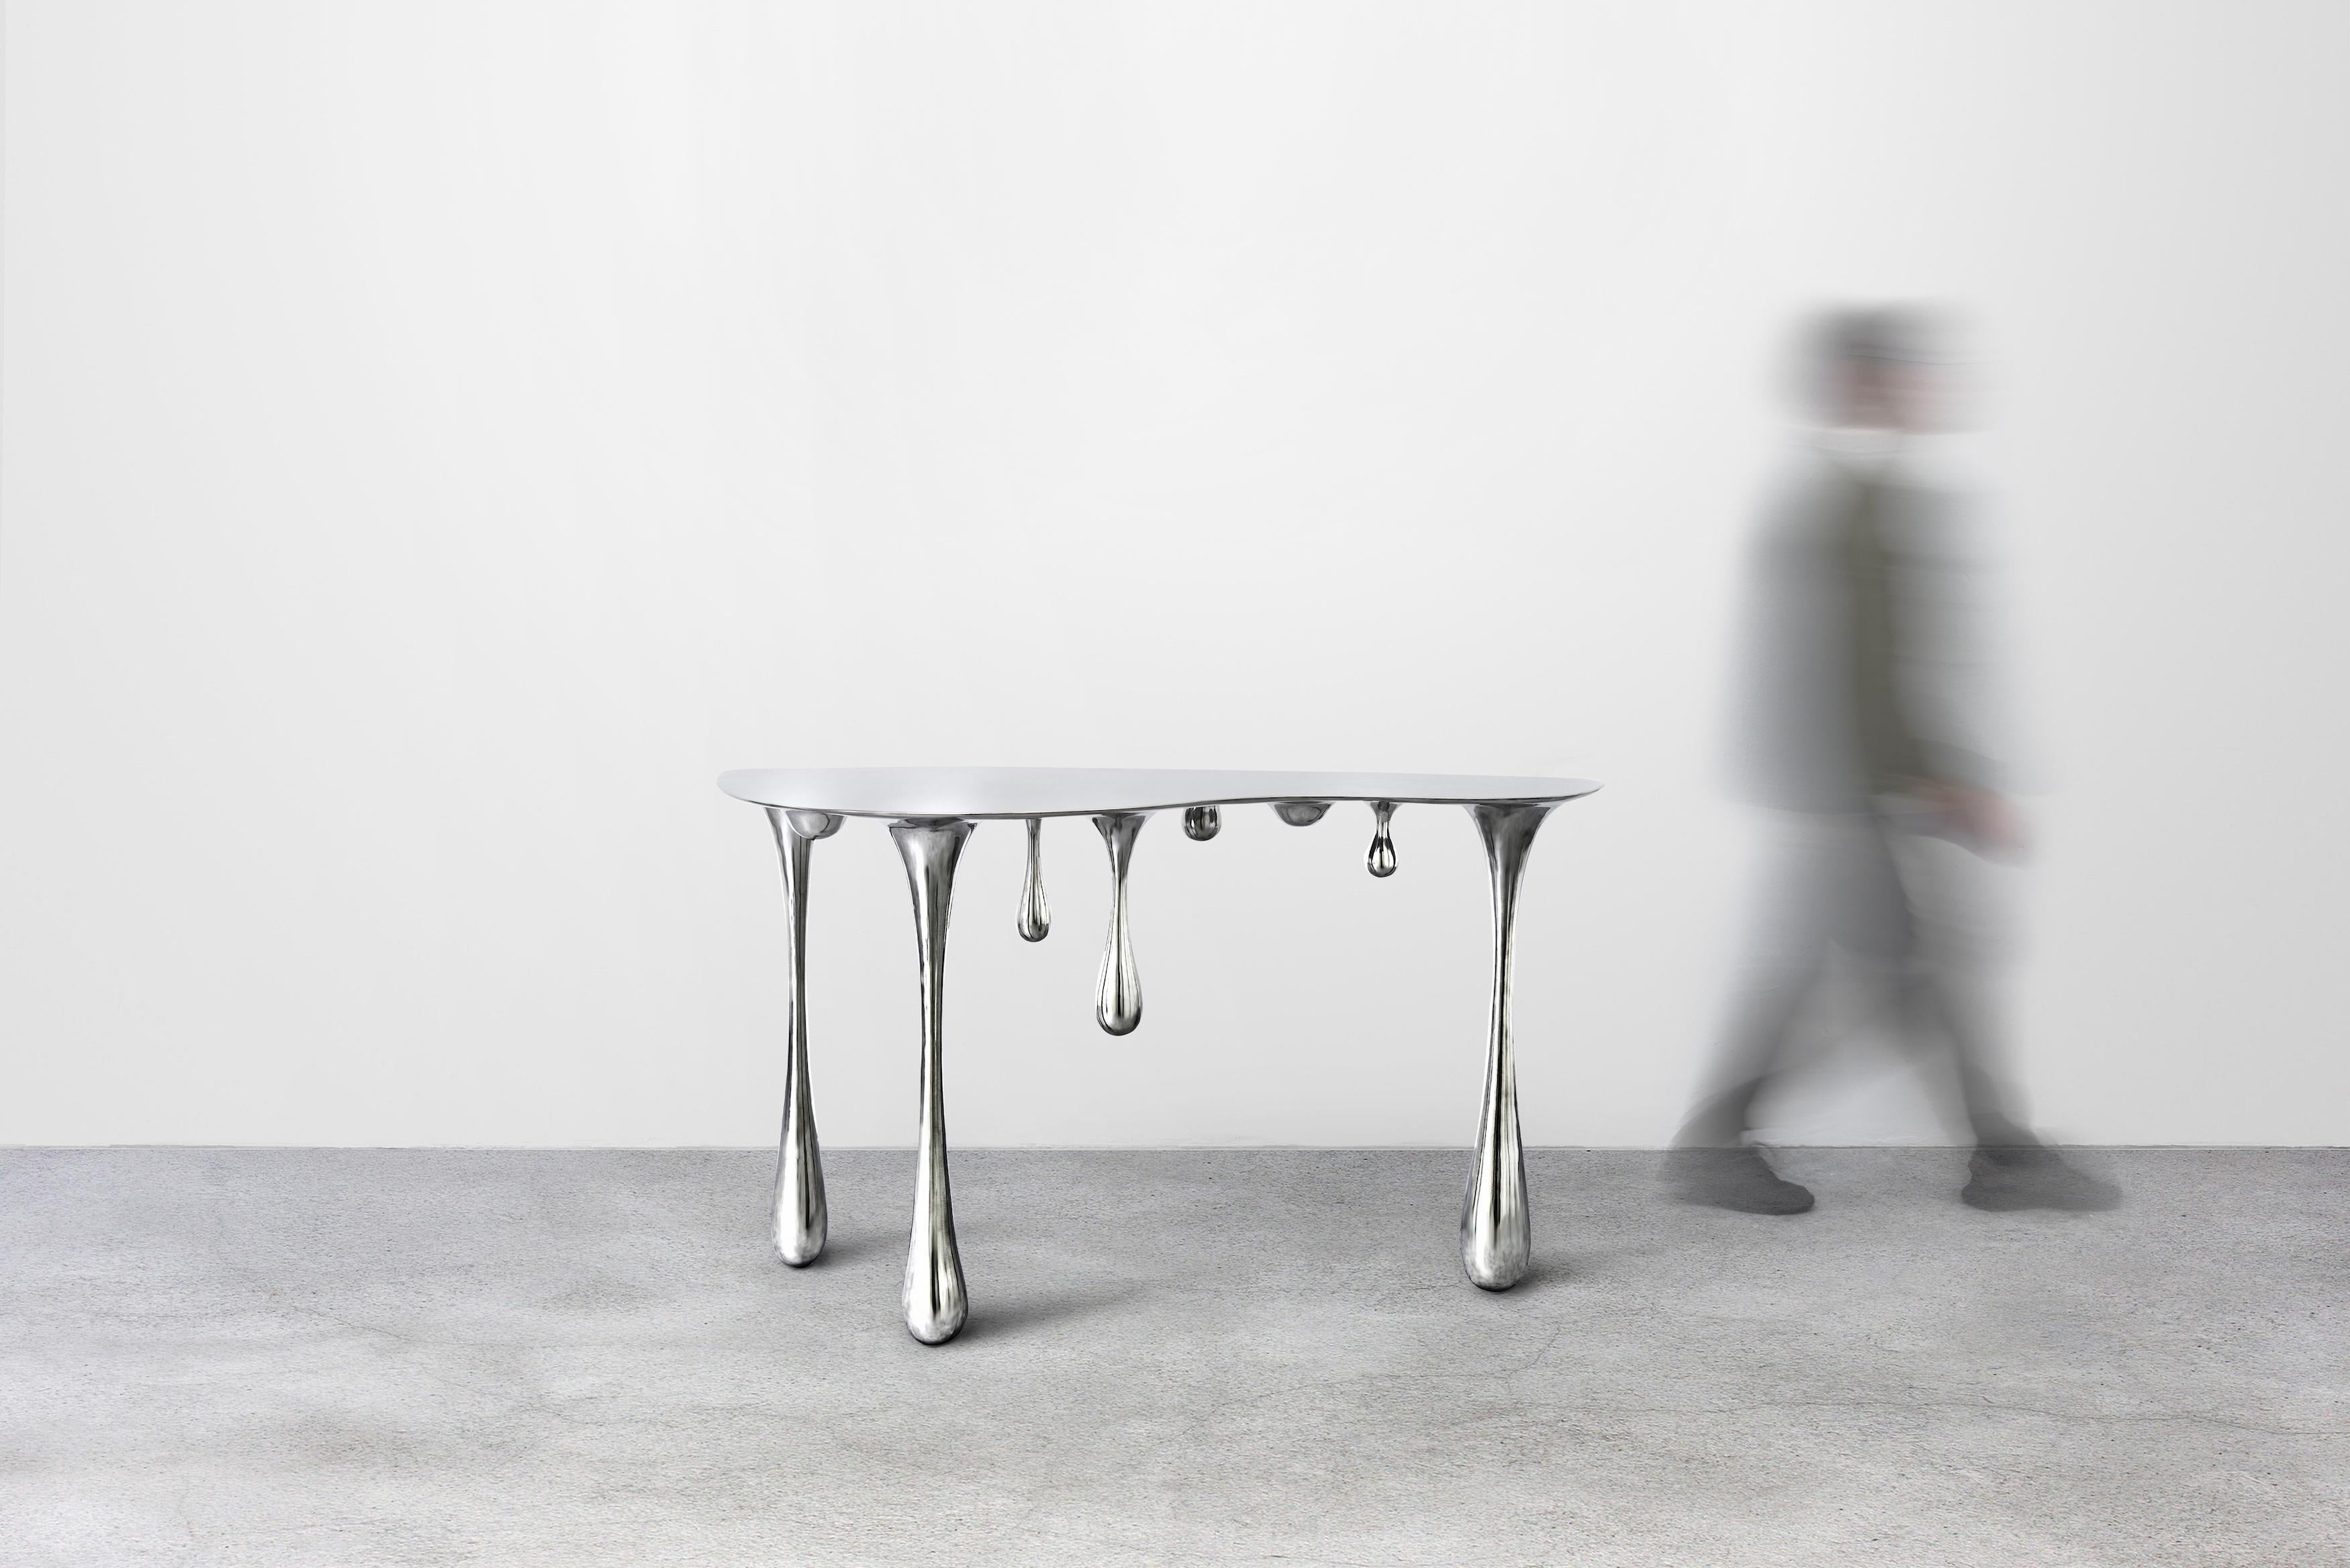 The table is made in polished stainless steel and is customizable upon request. Lead time is 30-45 days for current design and up to 75 days for custom piece. 

The artist Zhipeng Tan is a self-taught sculptor with an Industrial Design degree from